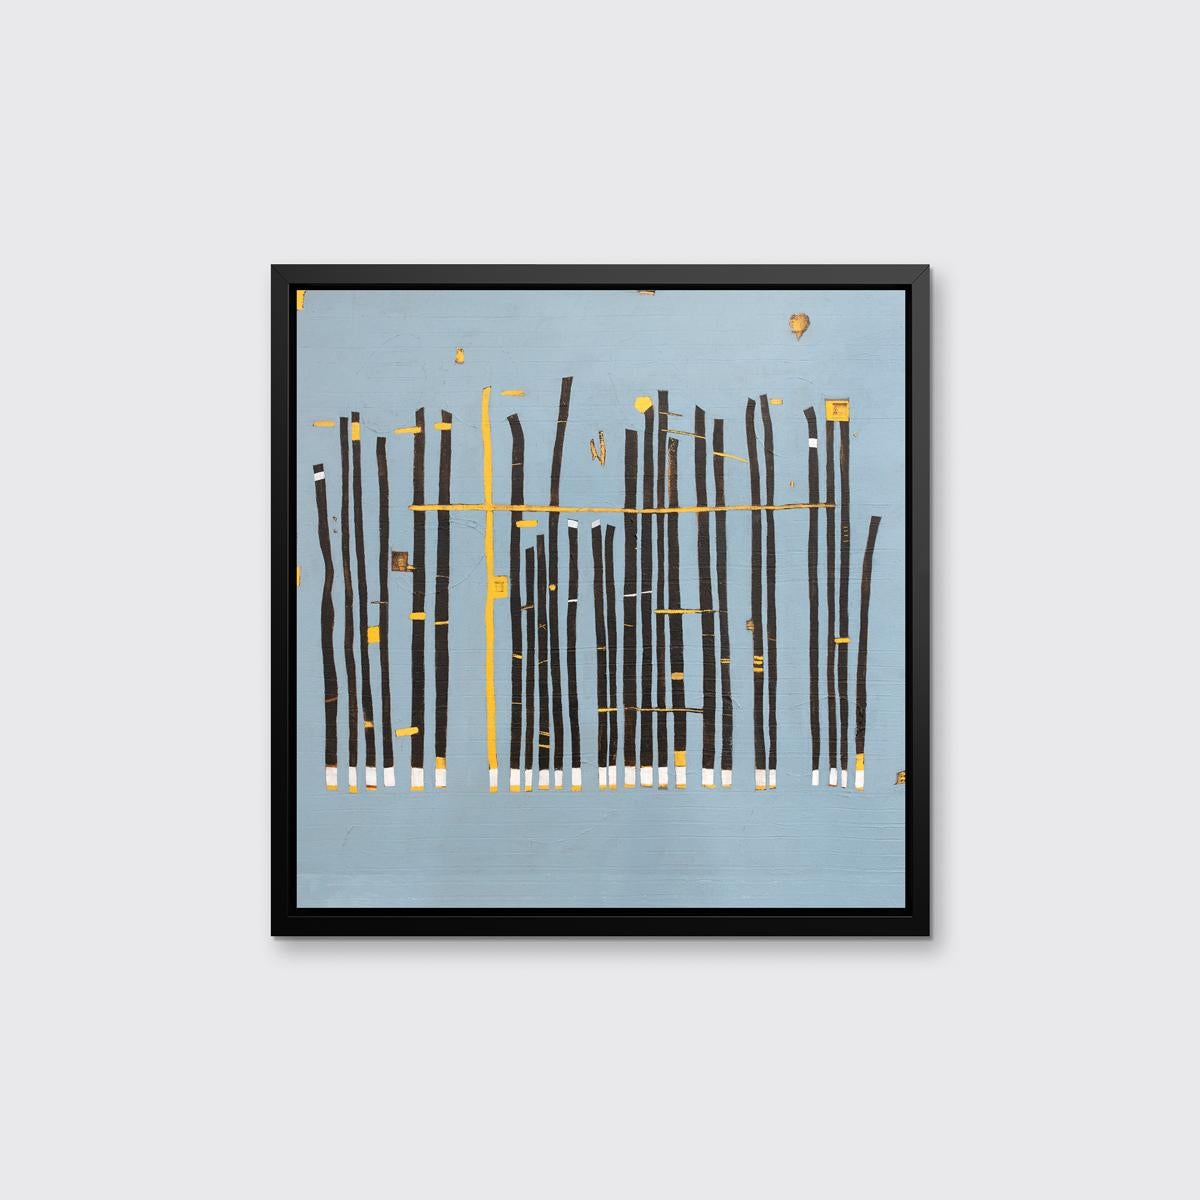 This abstract Limited Edition giclee print by Sofie Swann features thin, dark blue parallel rectangles of varying heights, each with a white and yellow bottom. A single yellow line is pictured at the center, with a perpendicular yellow line running